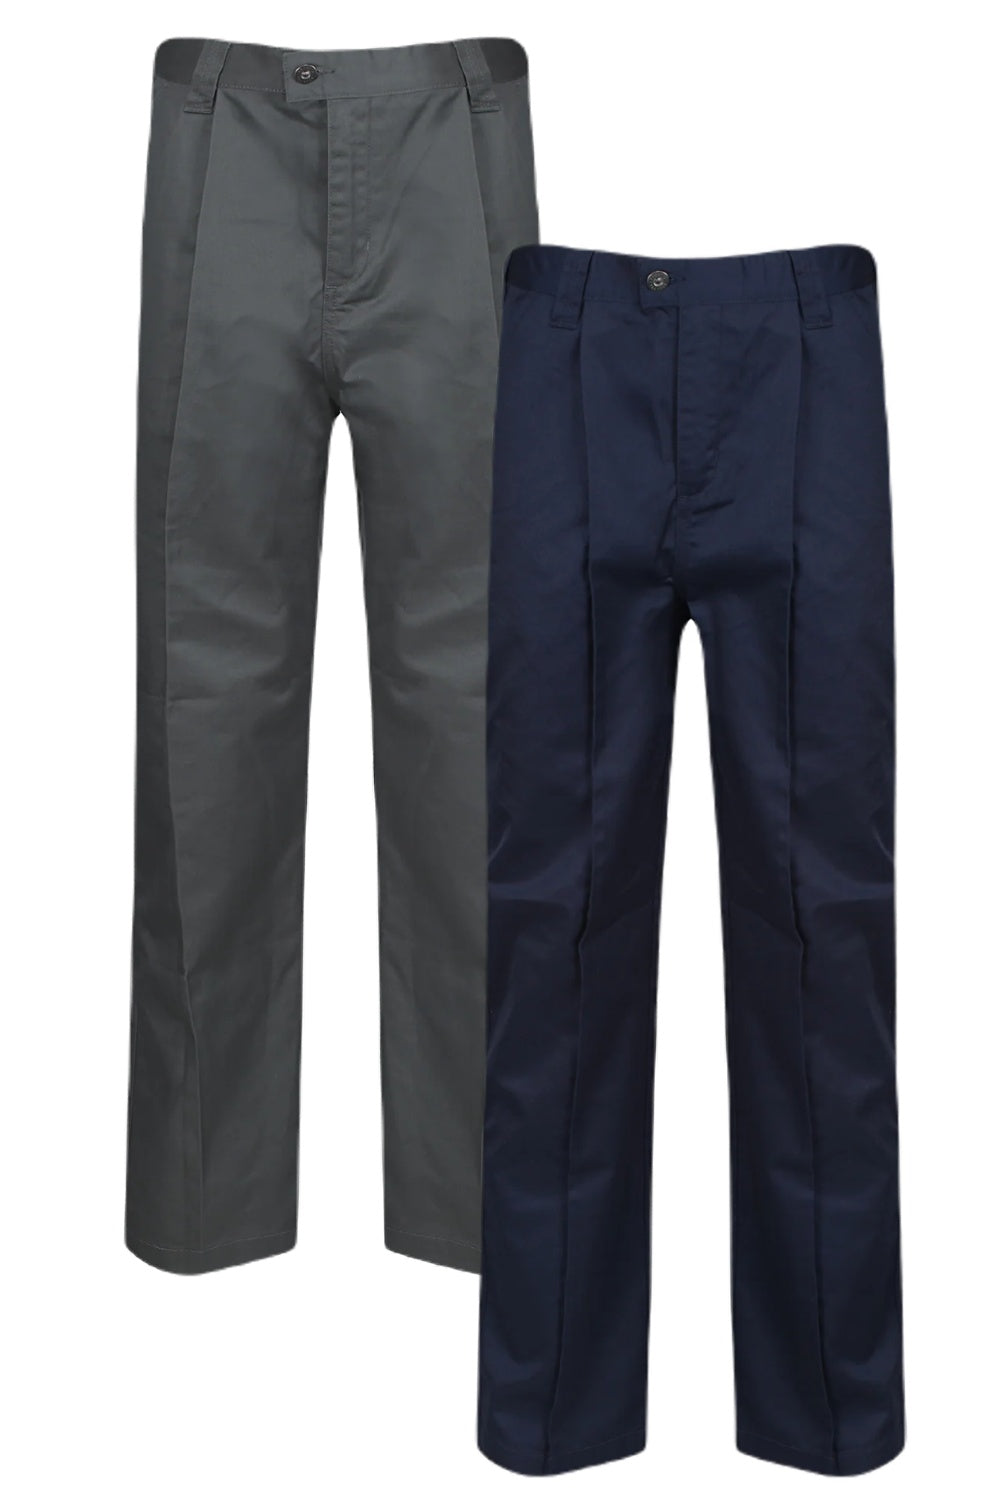 Regatta Combine Trouser in sage Green and Navy